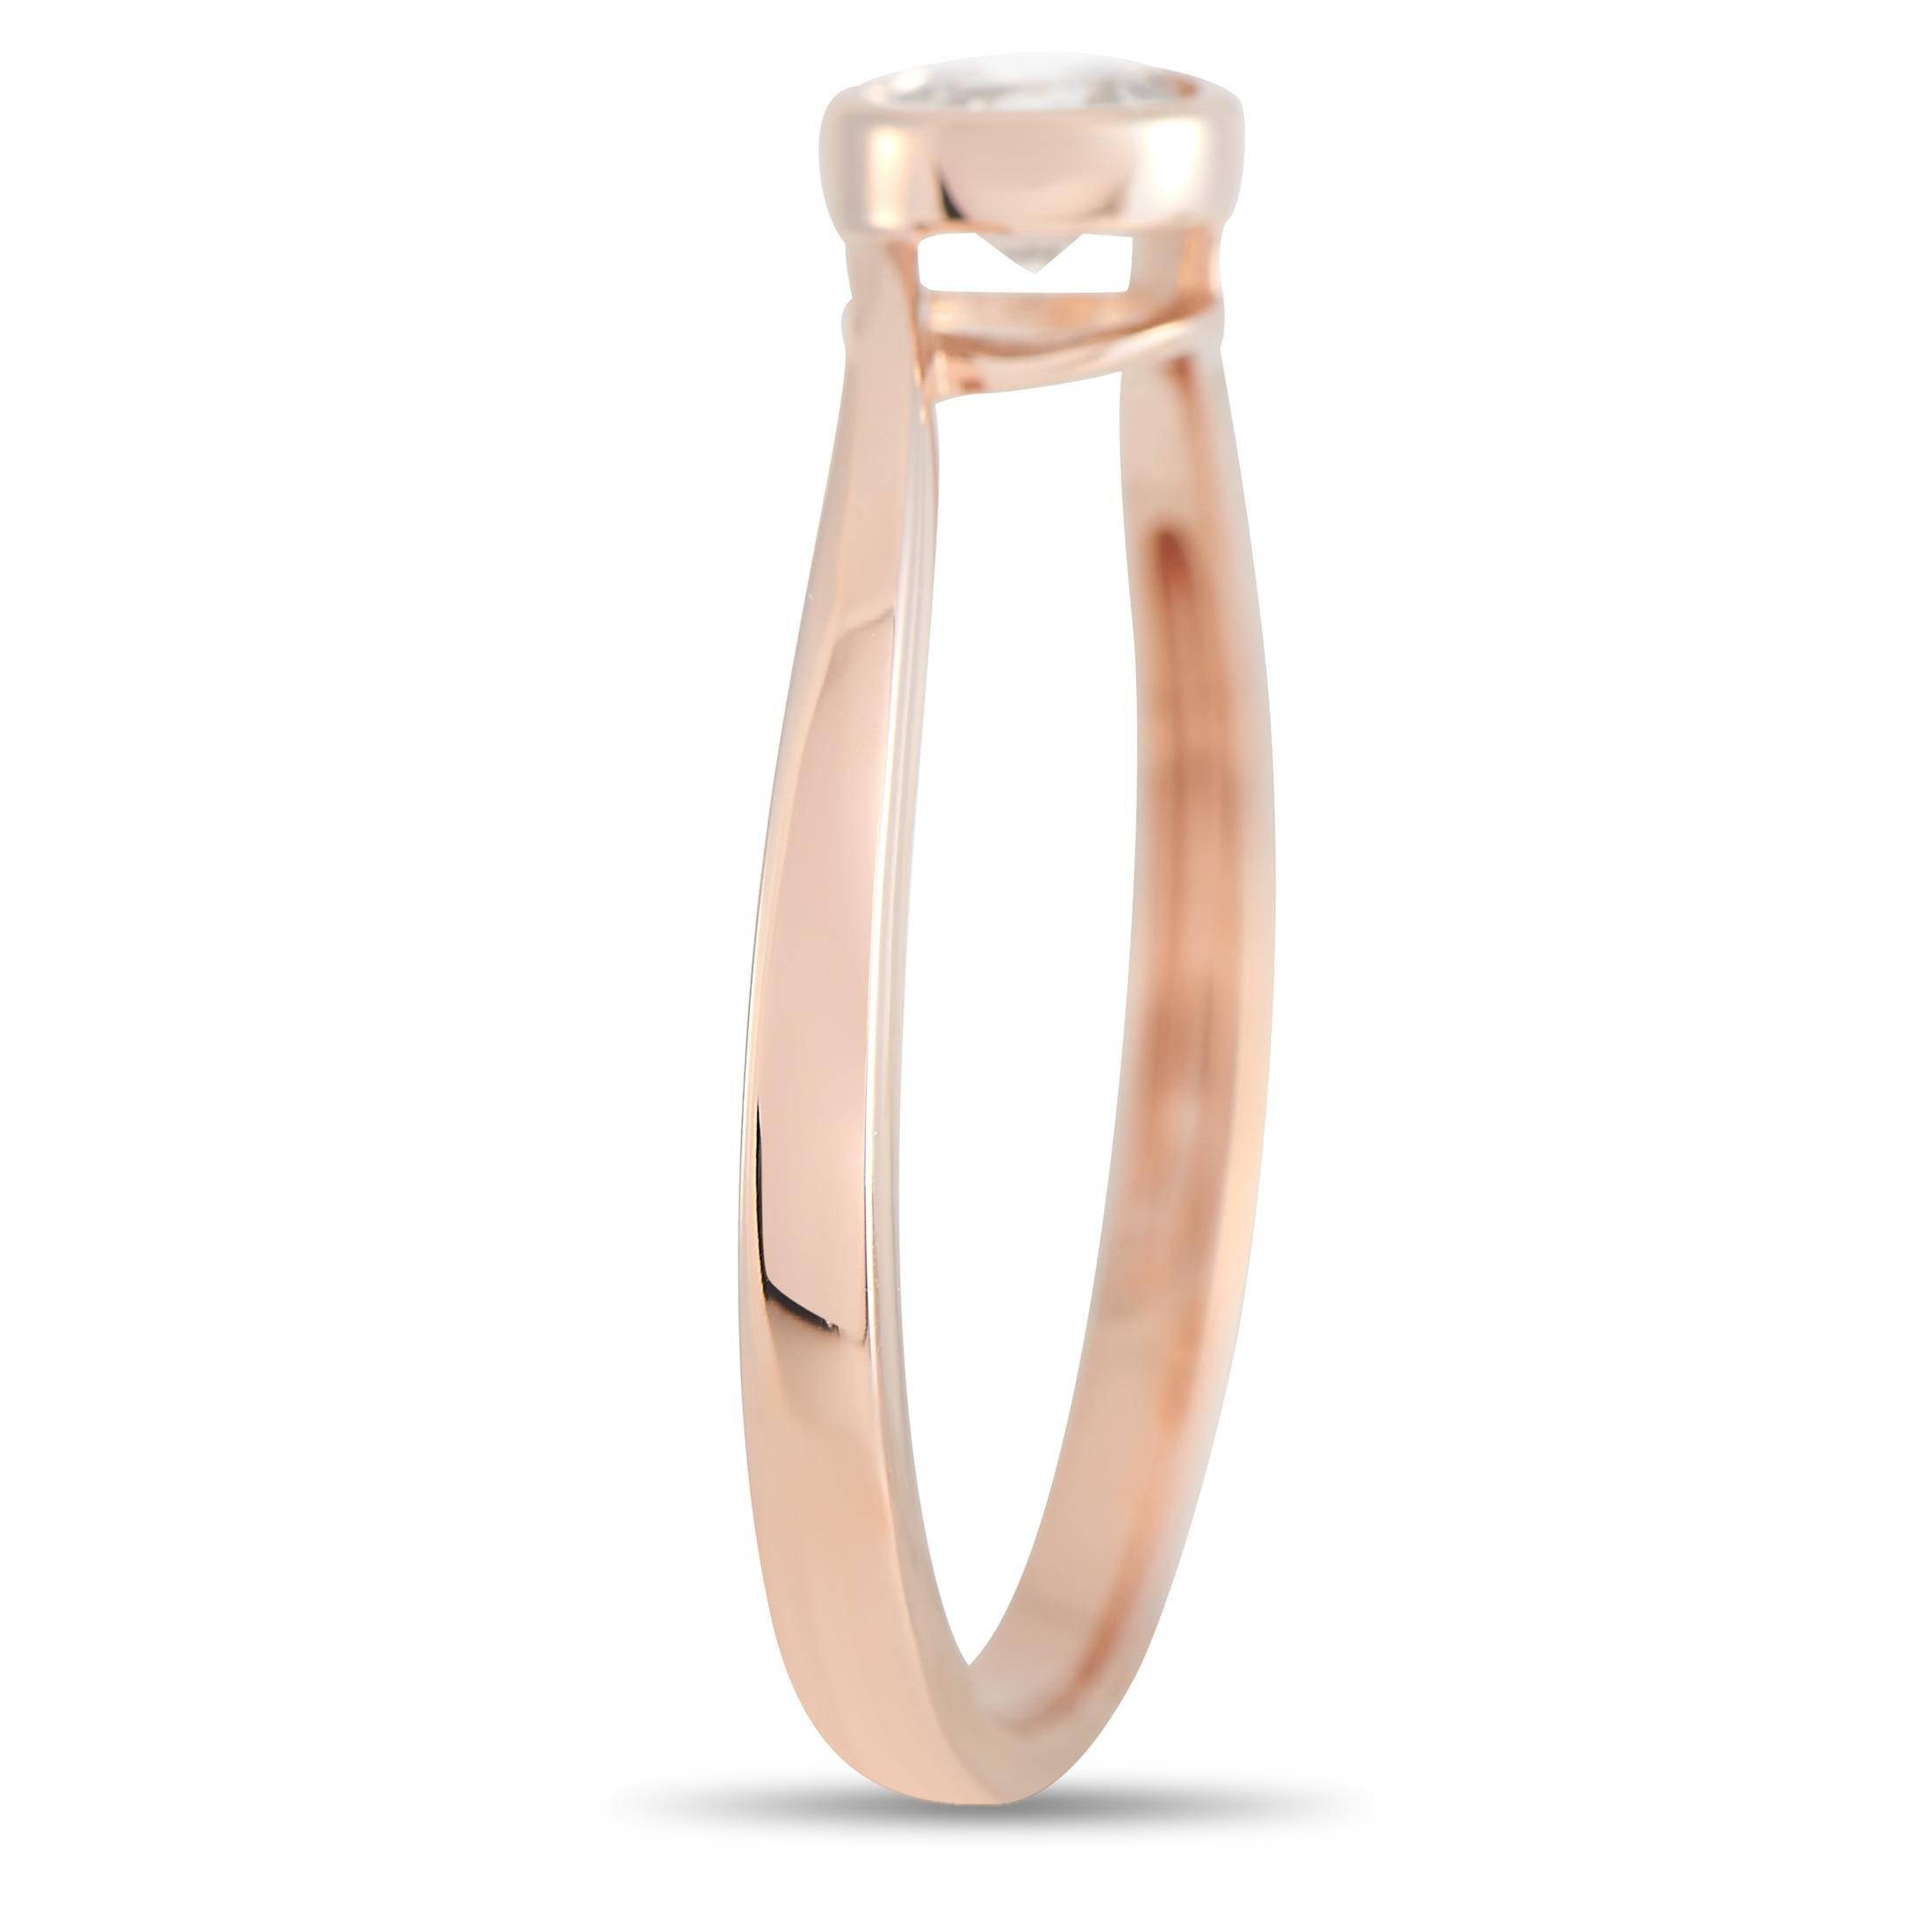 This pretty LB Exclusive ring is a classic. The band is made with 18K Rose Gold and bezel-set with a 0.26 carat round cut diamond. The ring has a band thickness of 2 mm, a top height of 3 mm, and top dimensions of 5 by 5 mm, with a total weight of